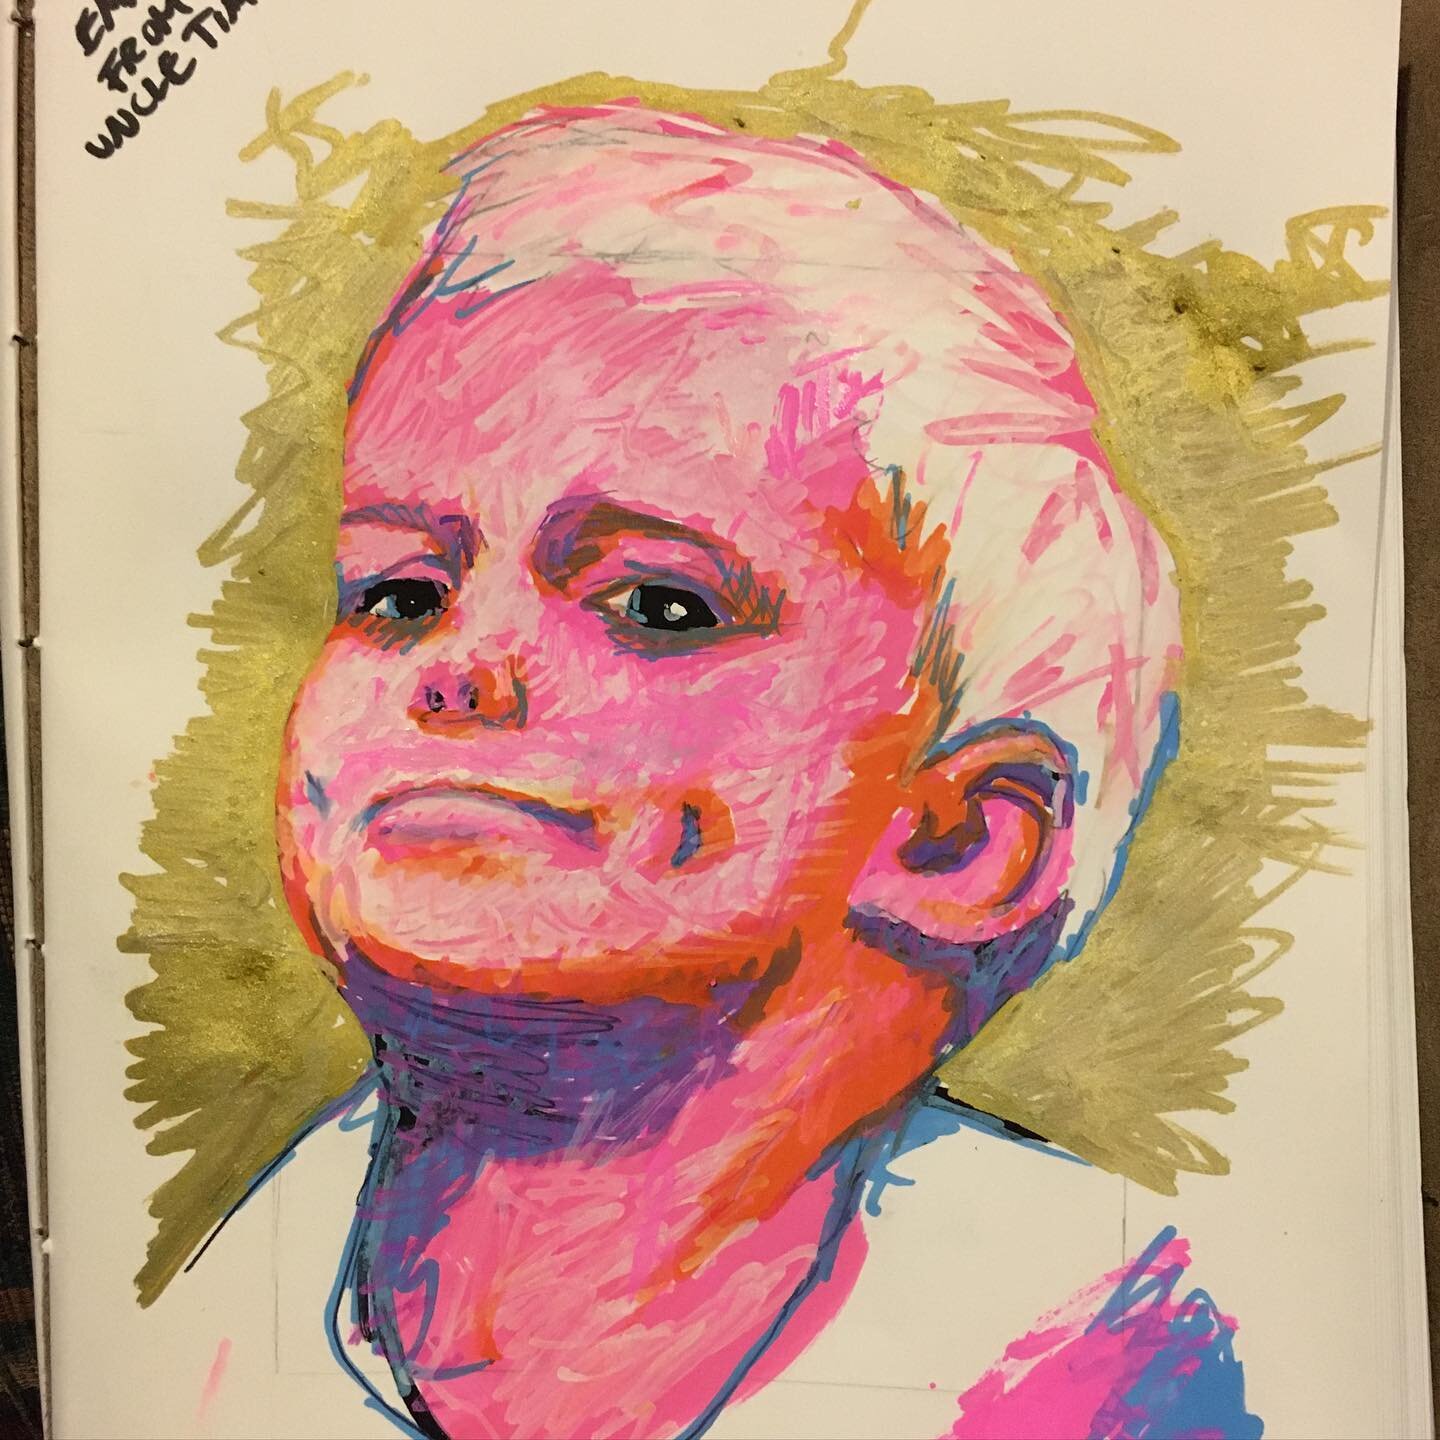 My version of nephew Nate doing an impression of sister Lyd. 
For niece Emmy 
#paintmarkers #ink #pencildrawing #sketchbook